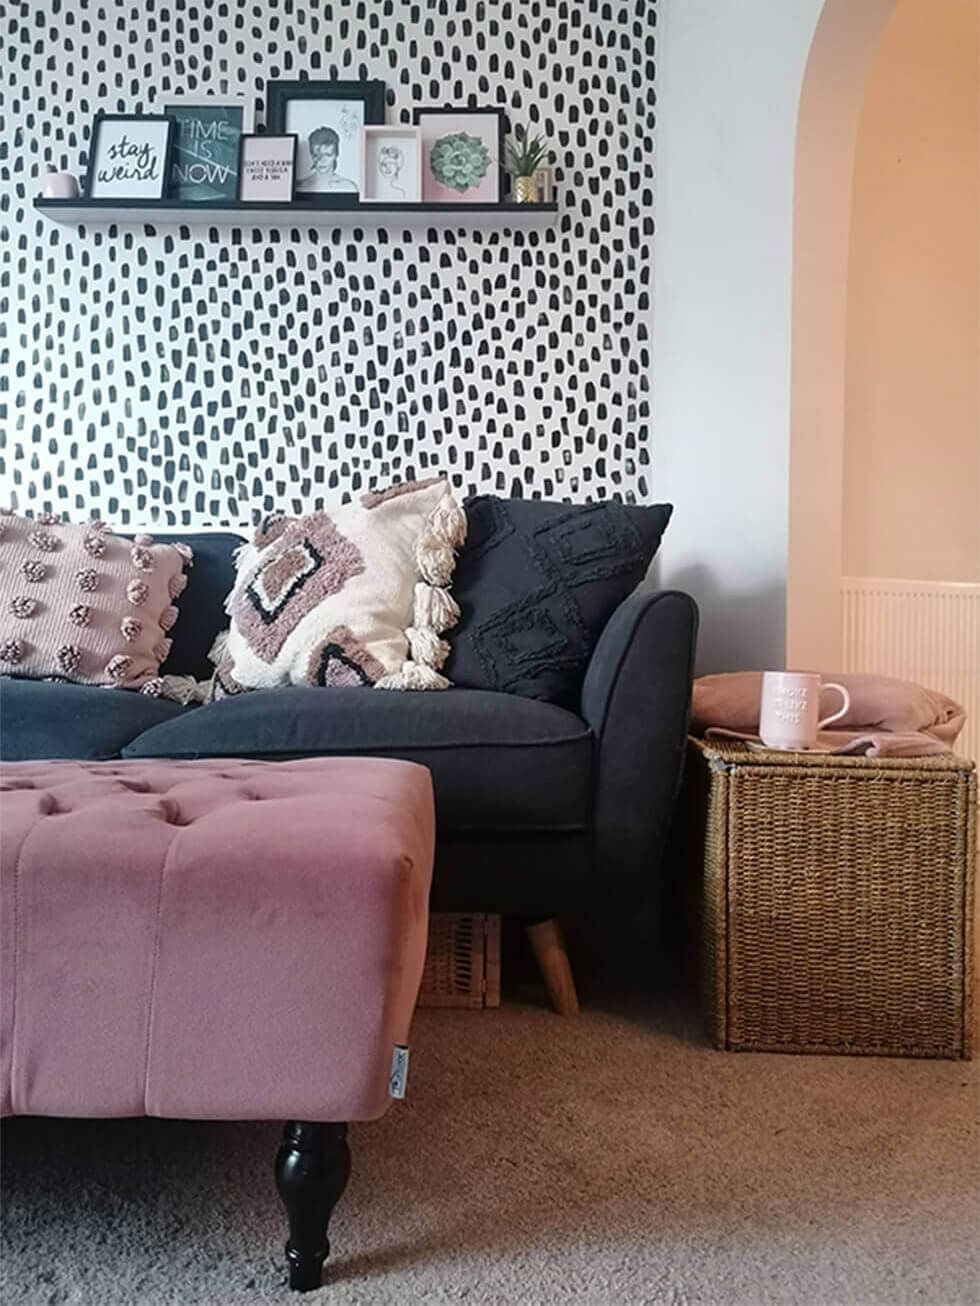 Black sofa and pink ottoman in a living room with polka dot walls